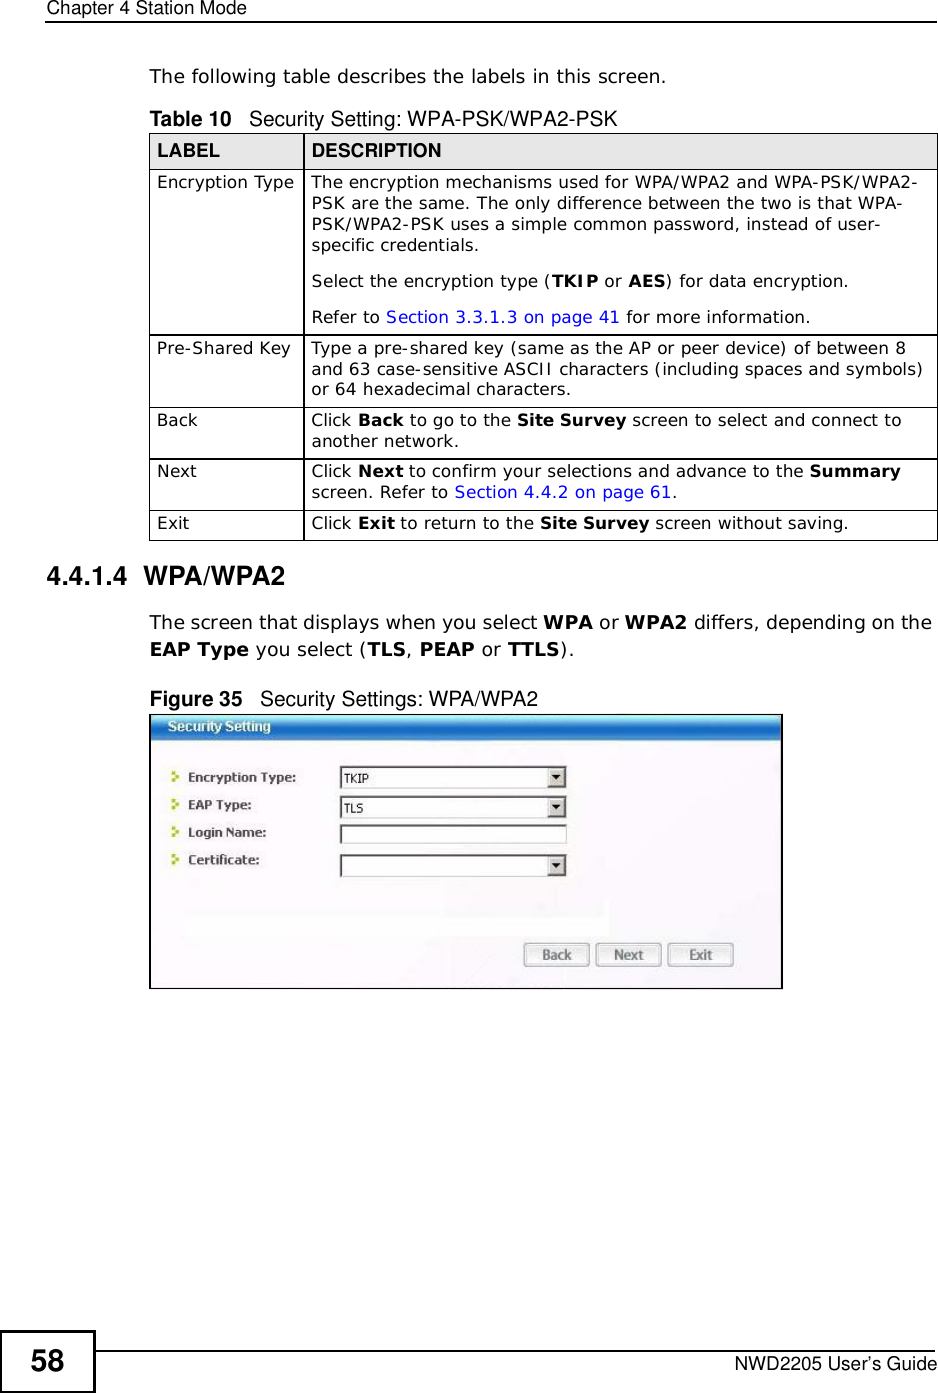 Chapter 4Station ModeNWD2205 User’s Guide58The following table describes the labels in this screen. 4.4.1.4  WPA/WPA2The screen that displays when you select WPA or WPA2 differs, depending on the EAP Type you select (TLS,PEAP or TTLS).Figure 35   Security Settings: WPA/WPA2 Table 10   Security Setting: WPA-PSK/WPA2-PSKLABEL DESCRIPTIONEncryption TypeThe encryption mechanisms used for WPA/WPA2 and WPA-PSK/WPA2-PSK are the same. The only difference between the two is that WPA-PSK/WPA2-PSK uses a simple common password, instead of user-specific credentials.Select the encryption type (TKIP or AES) for data encryption.Refer to Section 3.3.1.3 on page 41 for more information.Pre-Shared KeyType a pre-shared key (same as the AP or peer device) of between 8 and 63 case-sensitive ASCII characters (including spaces and symbols) or 64 hexadecimal characters.BackClick Back to go to the Site Survey screen to select and connect to another network.NextClick Next to confirm your selections and advance to the Summary screen. Refer to Section 4.4.2 on page 61.ExitClick Exit to return to the Site Survey screen without saving.